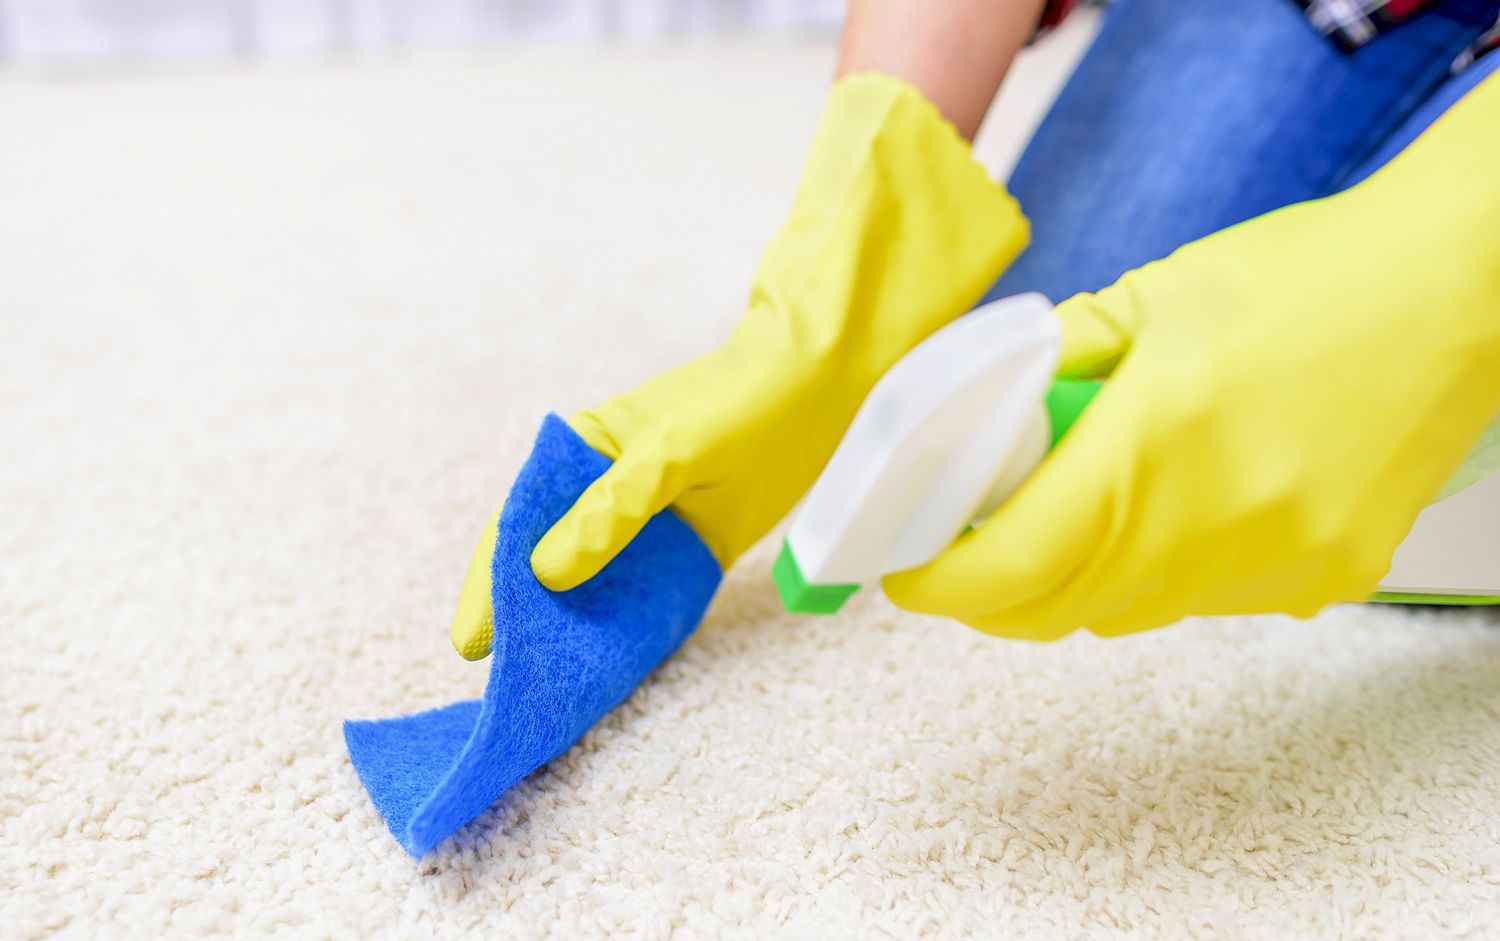 Someone cleaning light carpet with a cloth and spray bottle